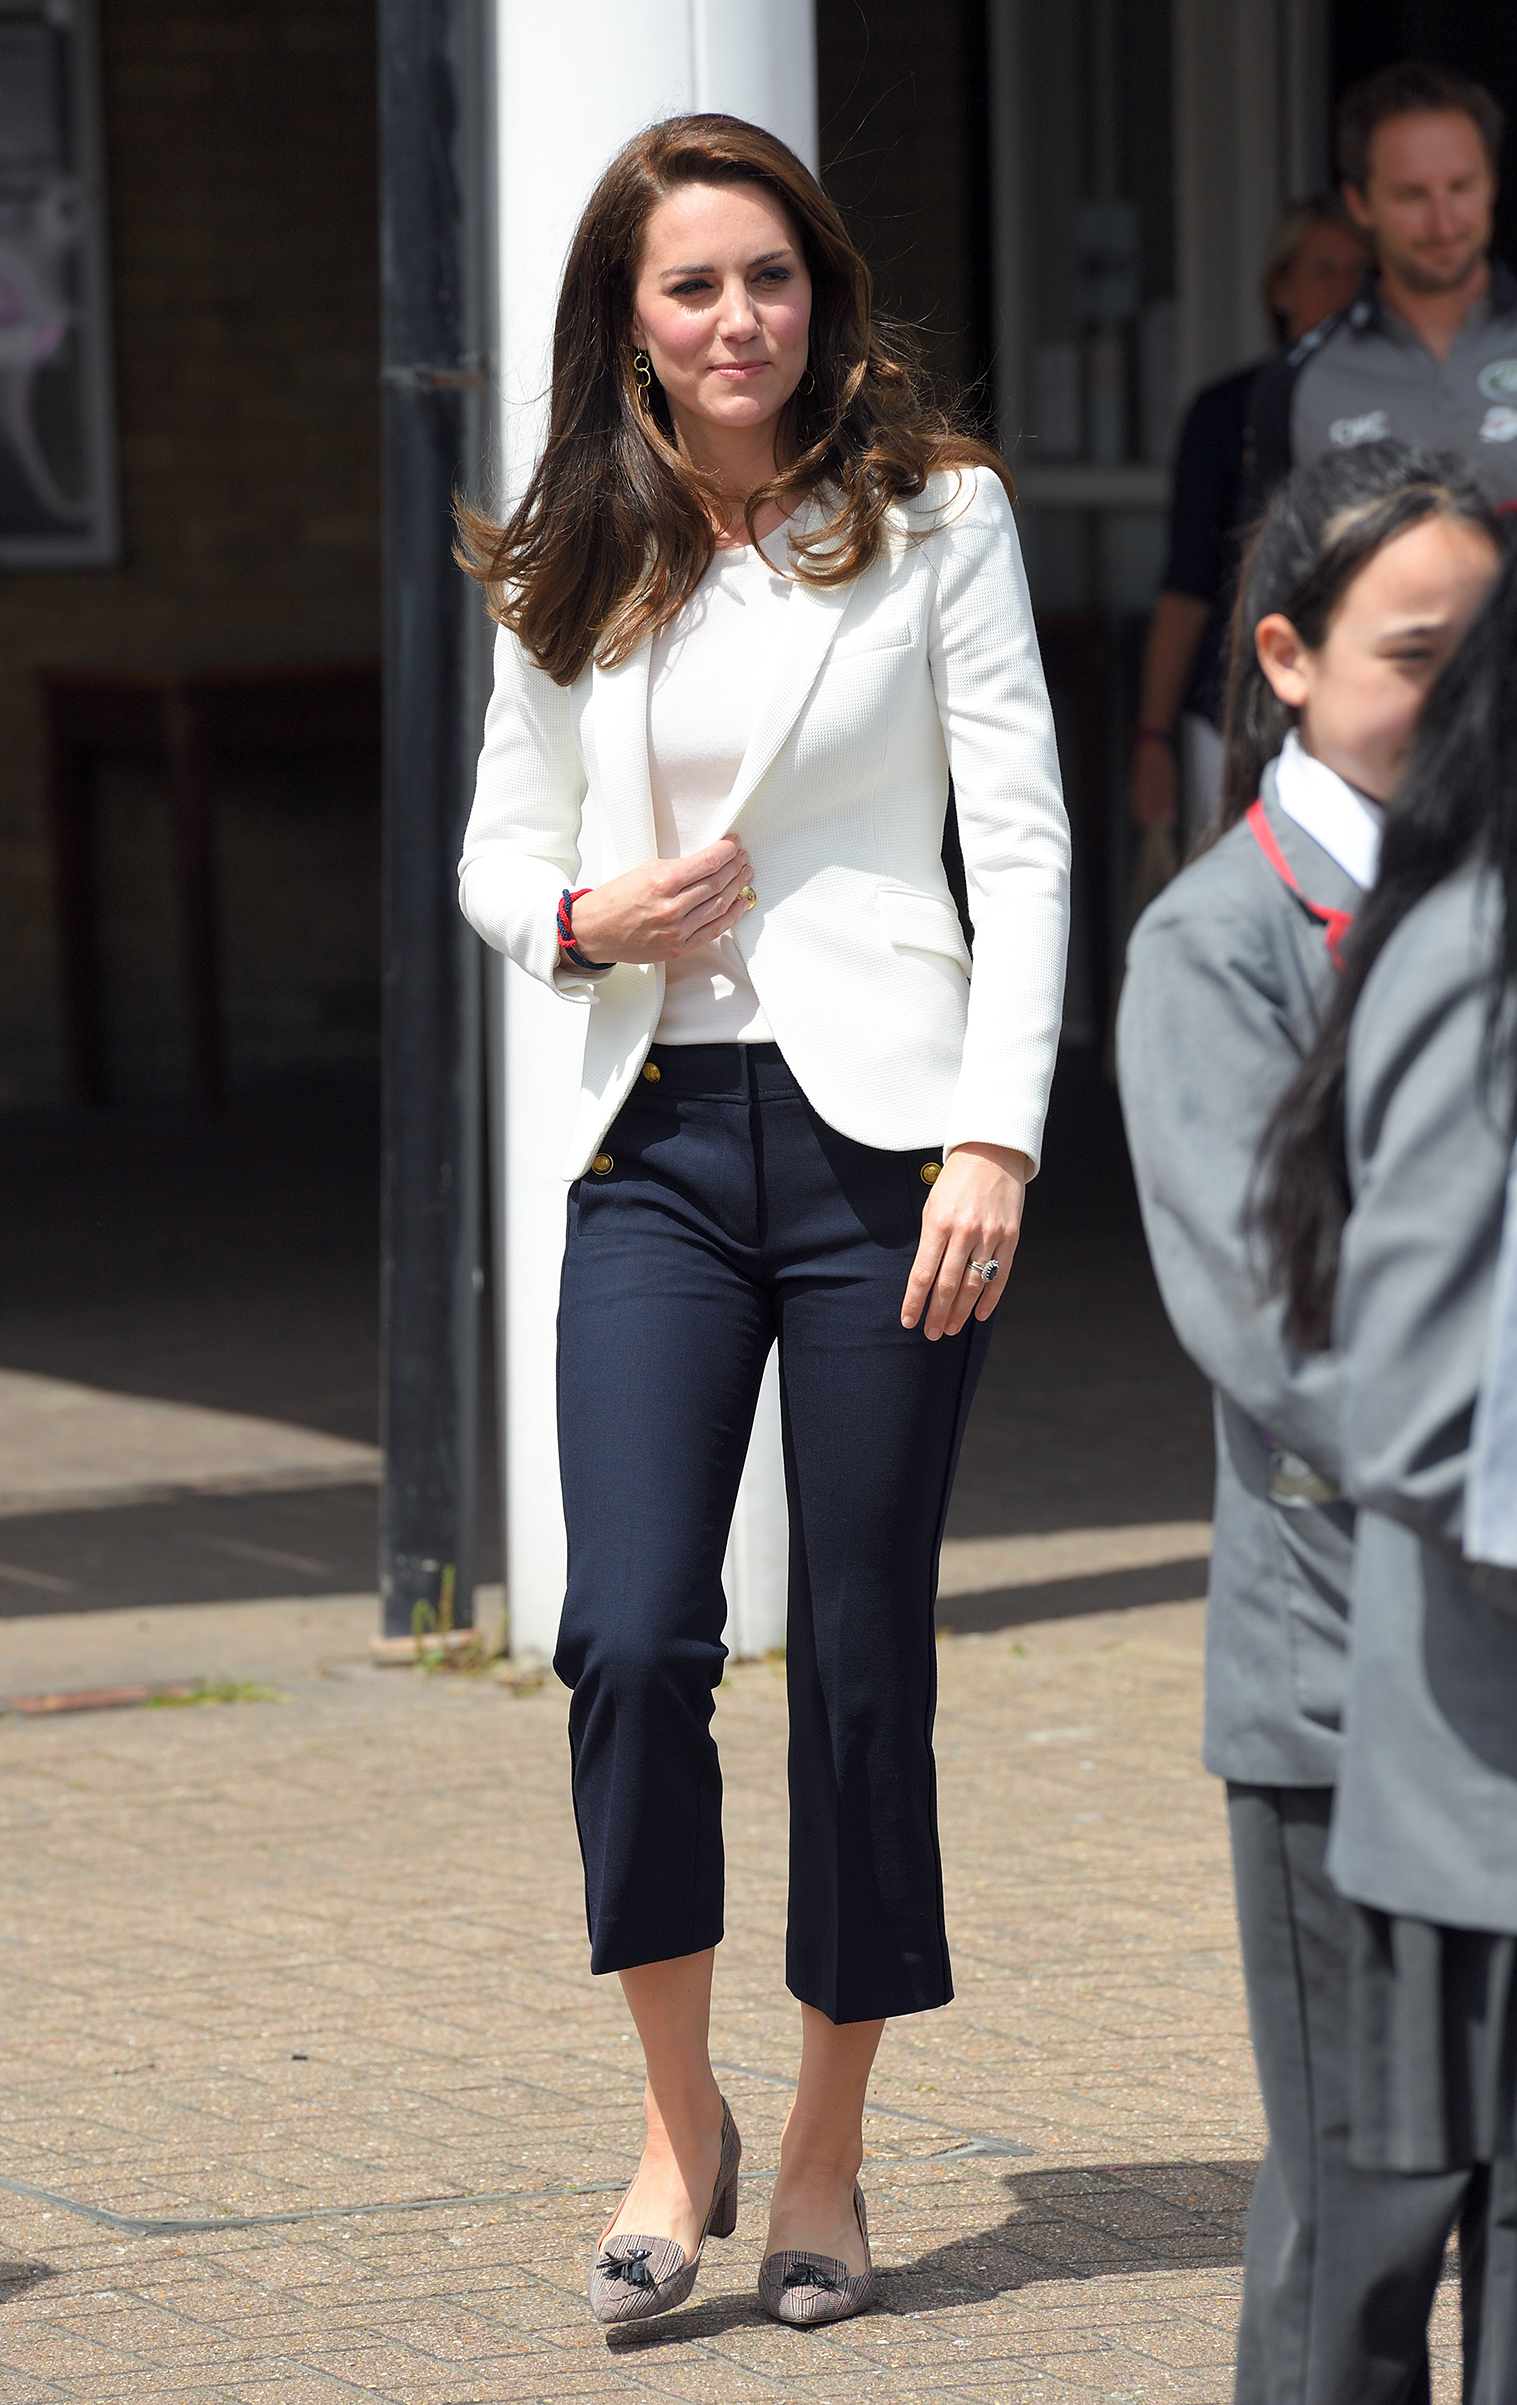 Catherine, Duchess of Cambridge, visits the 1851 Trust roadshow at Docklands Sailing and Watersports Center in London on June 16, 2017. The Duchess of Cambridge is patron of the 1851 Trust.